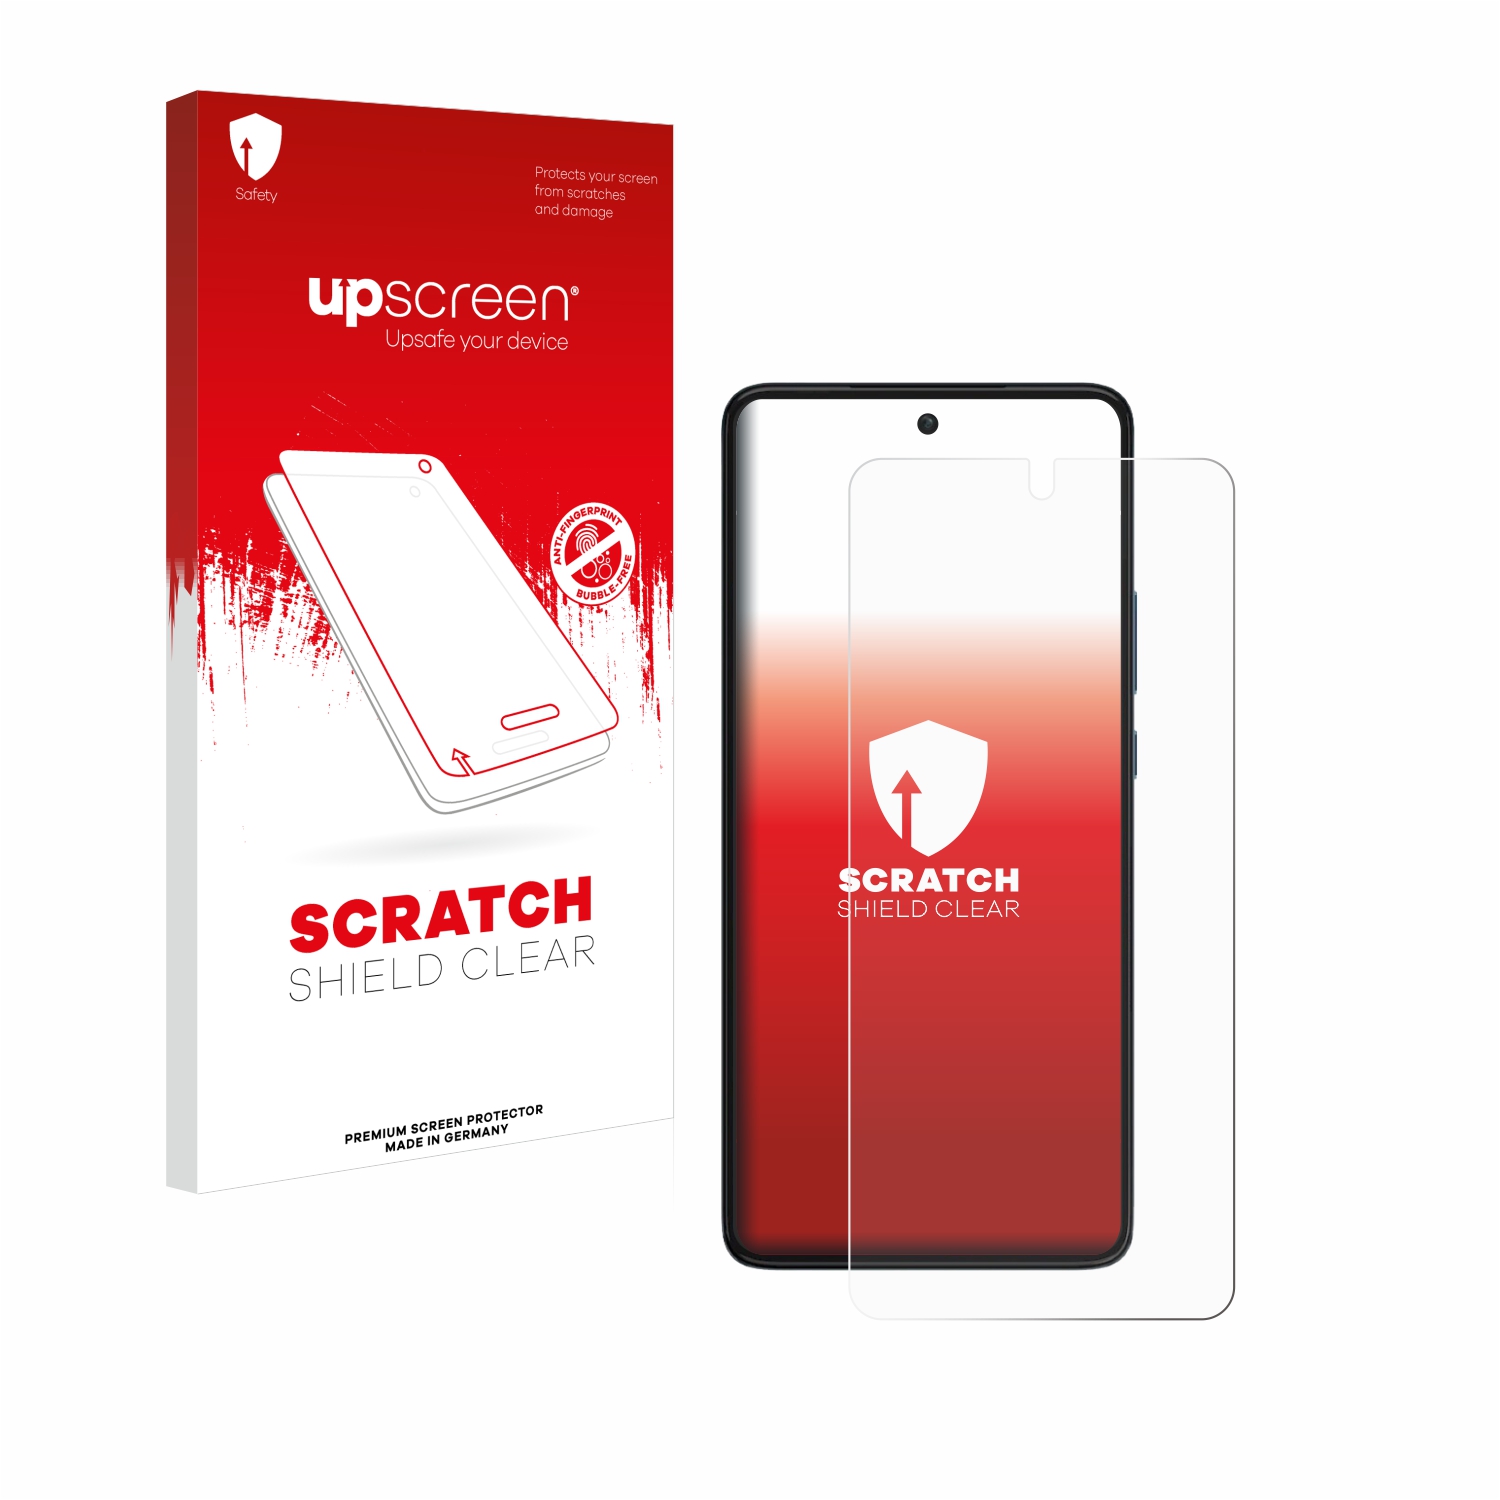 Strong Scratch Protection upscreen Scratch Shield Clear Screen Protector for Nokia C2-01 Multitouch Optimized High Transparency